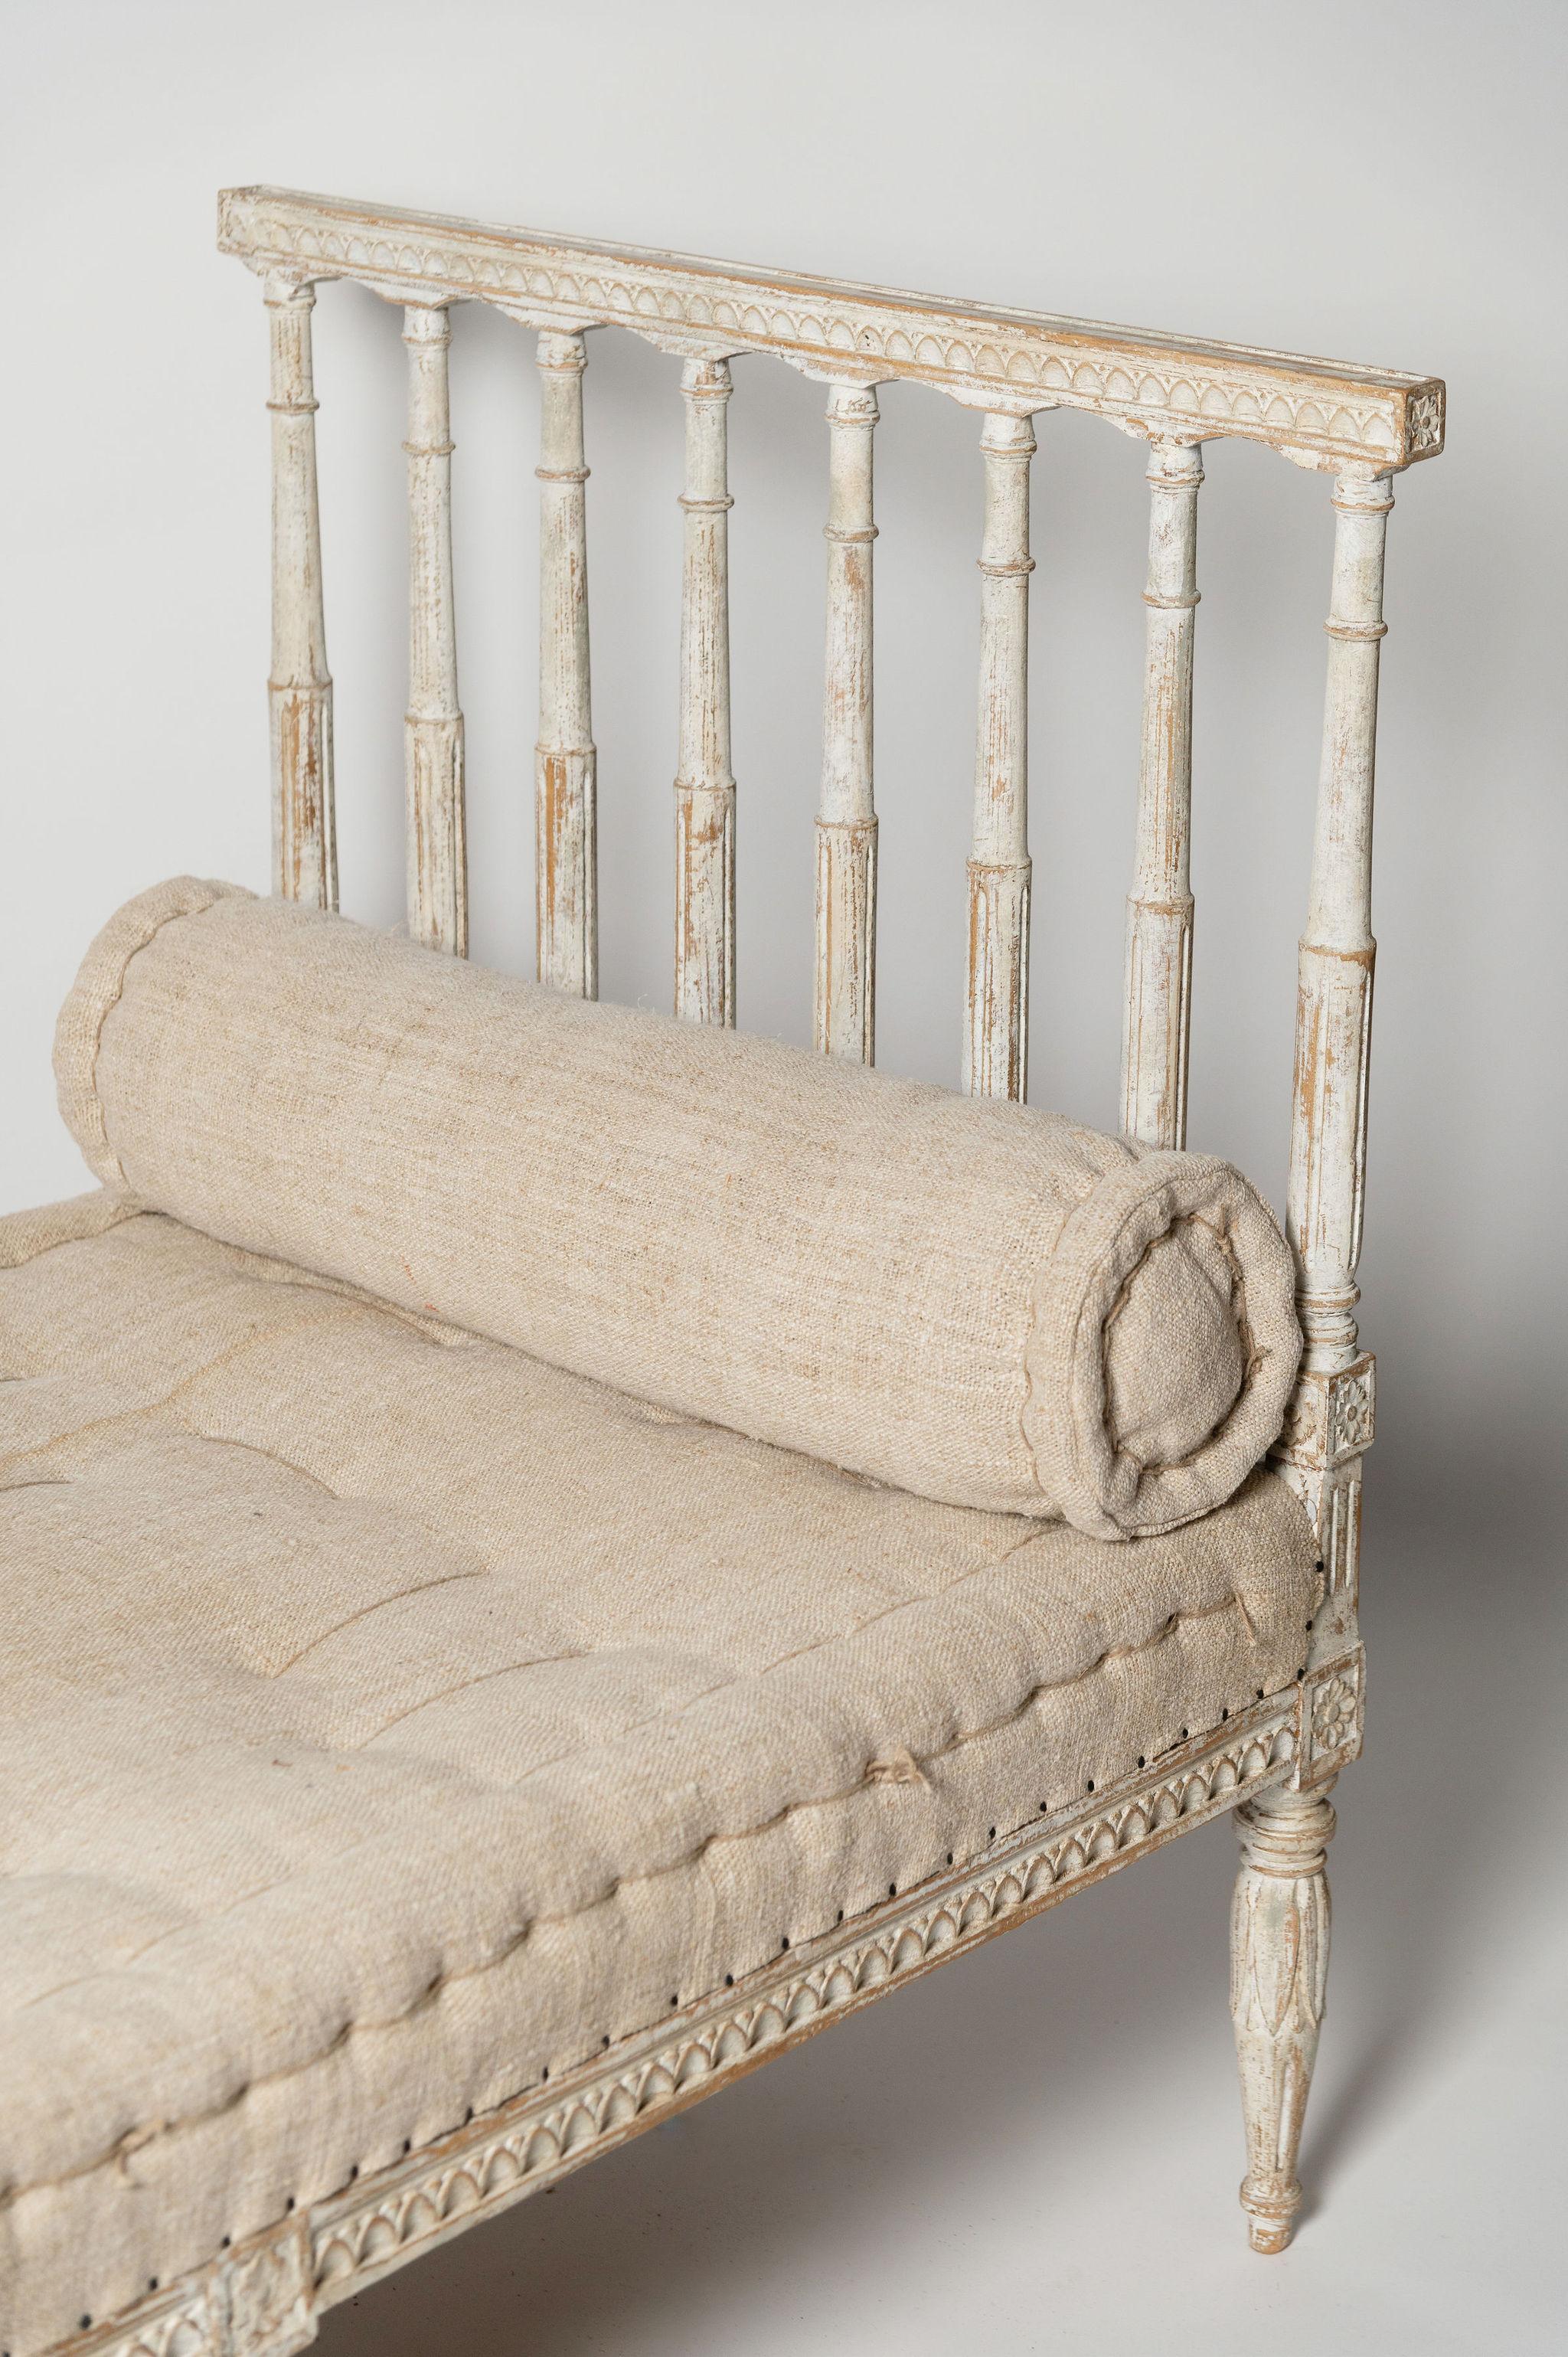 Antique Swedish daybed, sofa, stool, c1800, gustavian, Swedish upholstery   For Sale 3